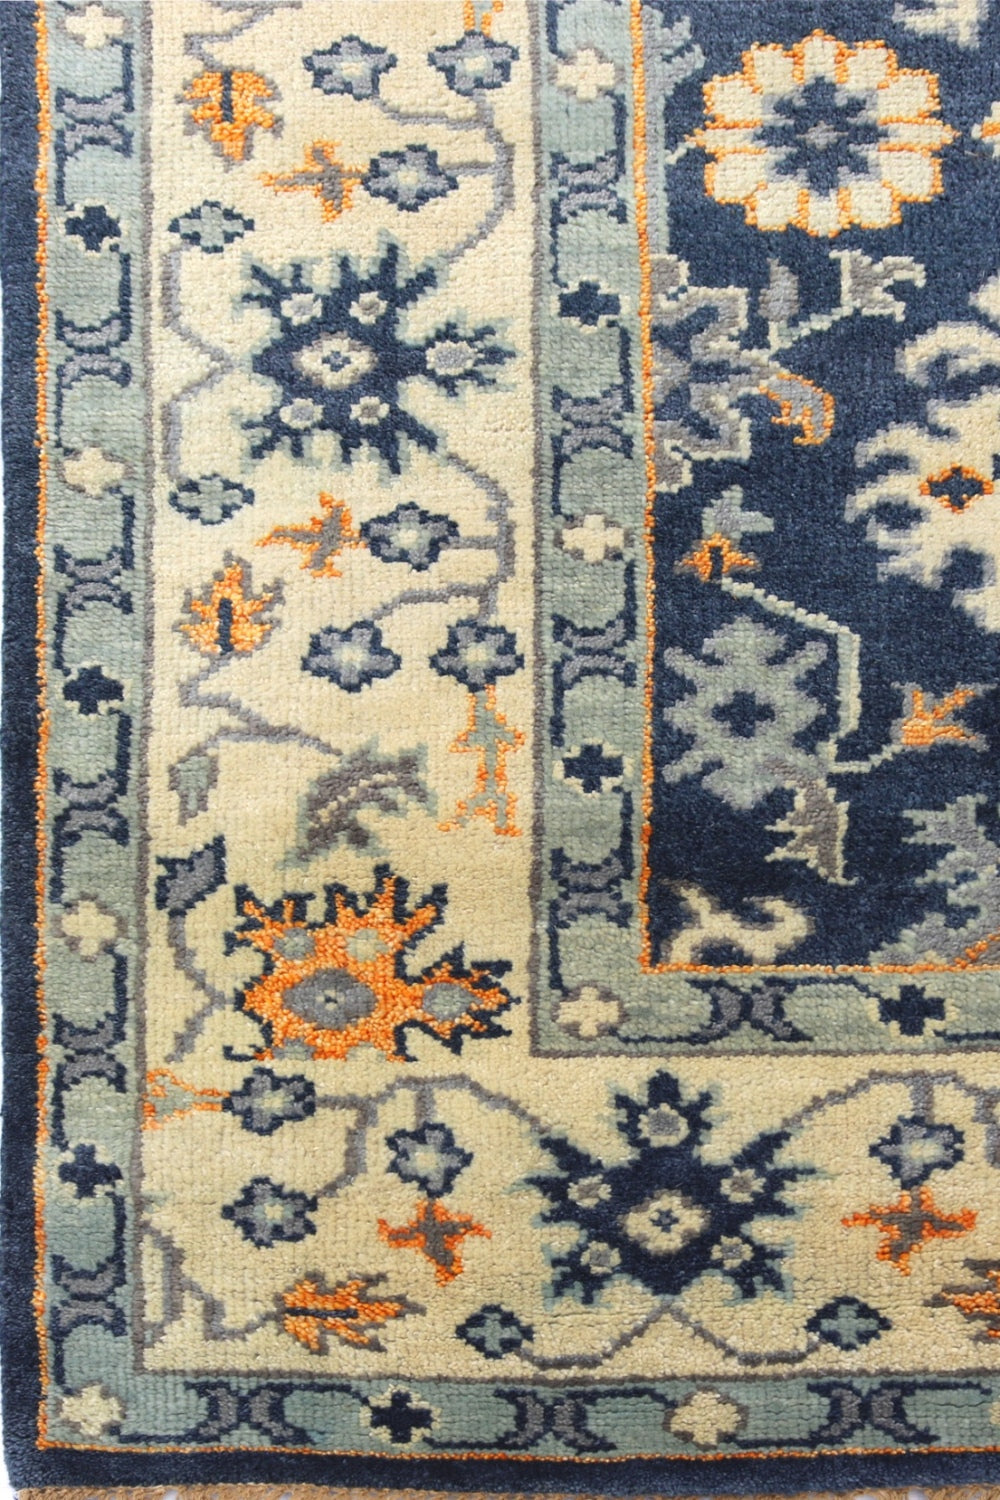 Sultanabad 7 Handwoven Traditional Rug, J71795